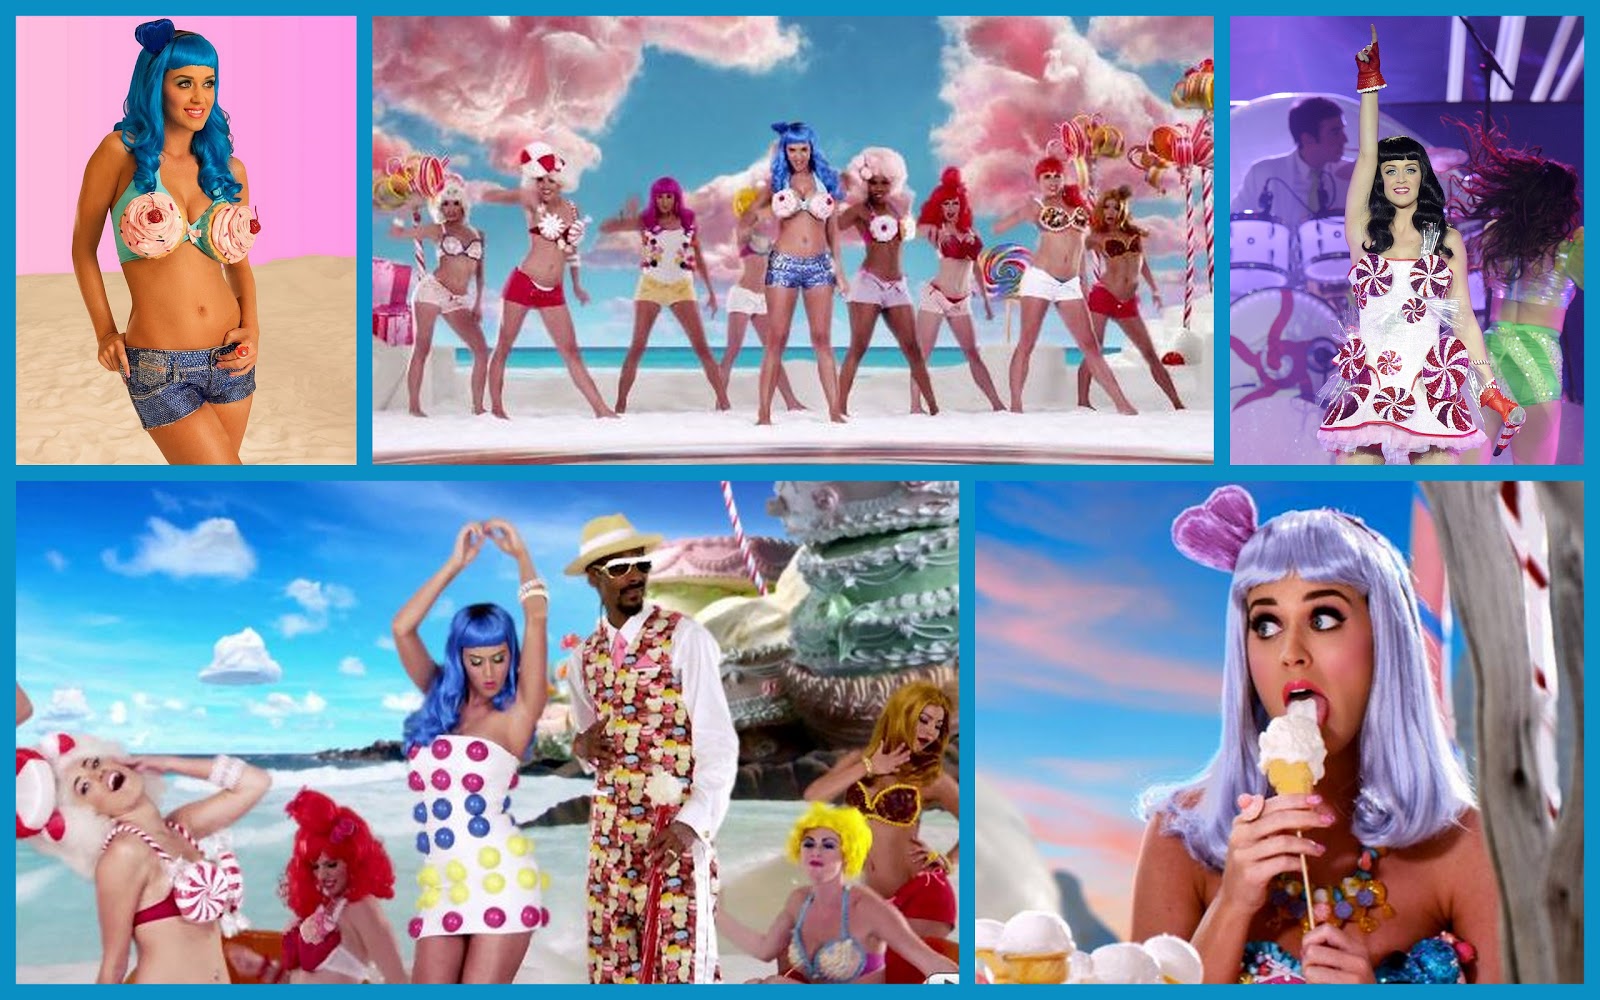 Katy Perry Candyland Costumes For Halloween